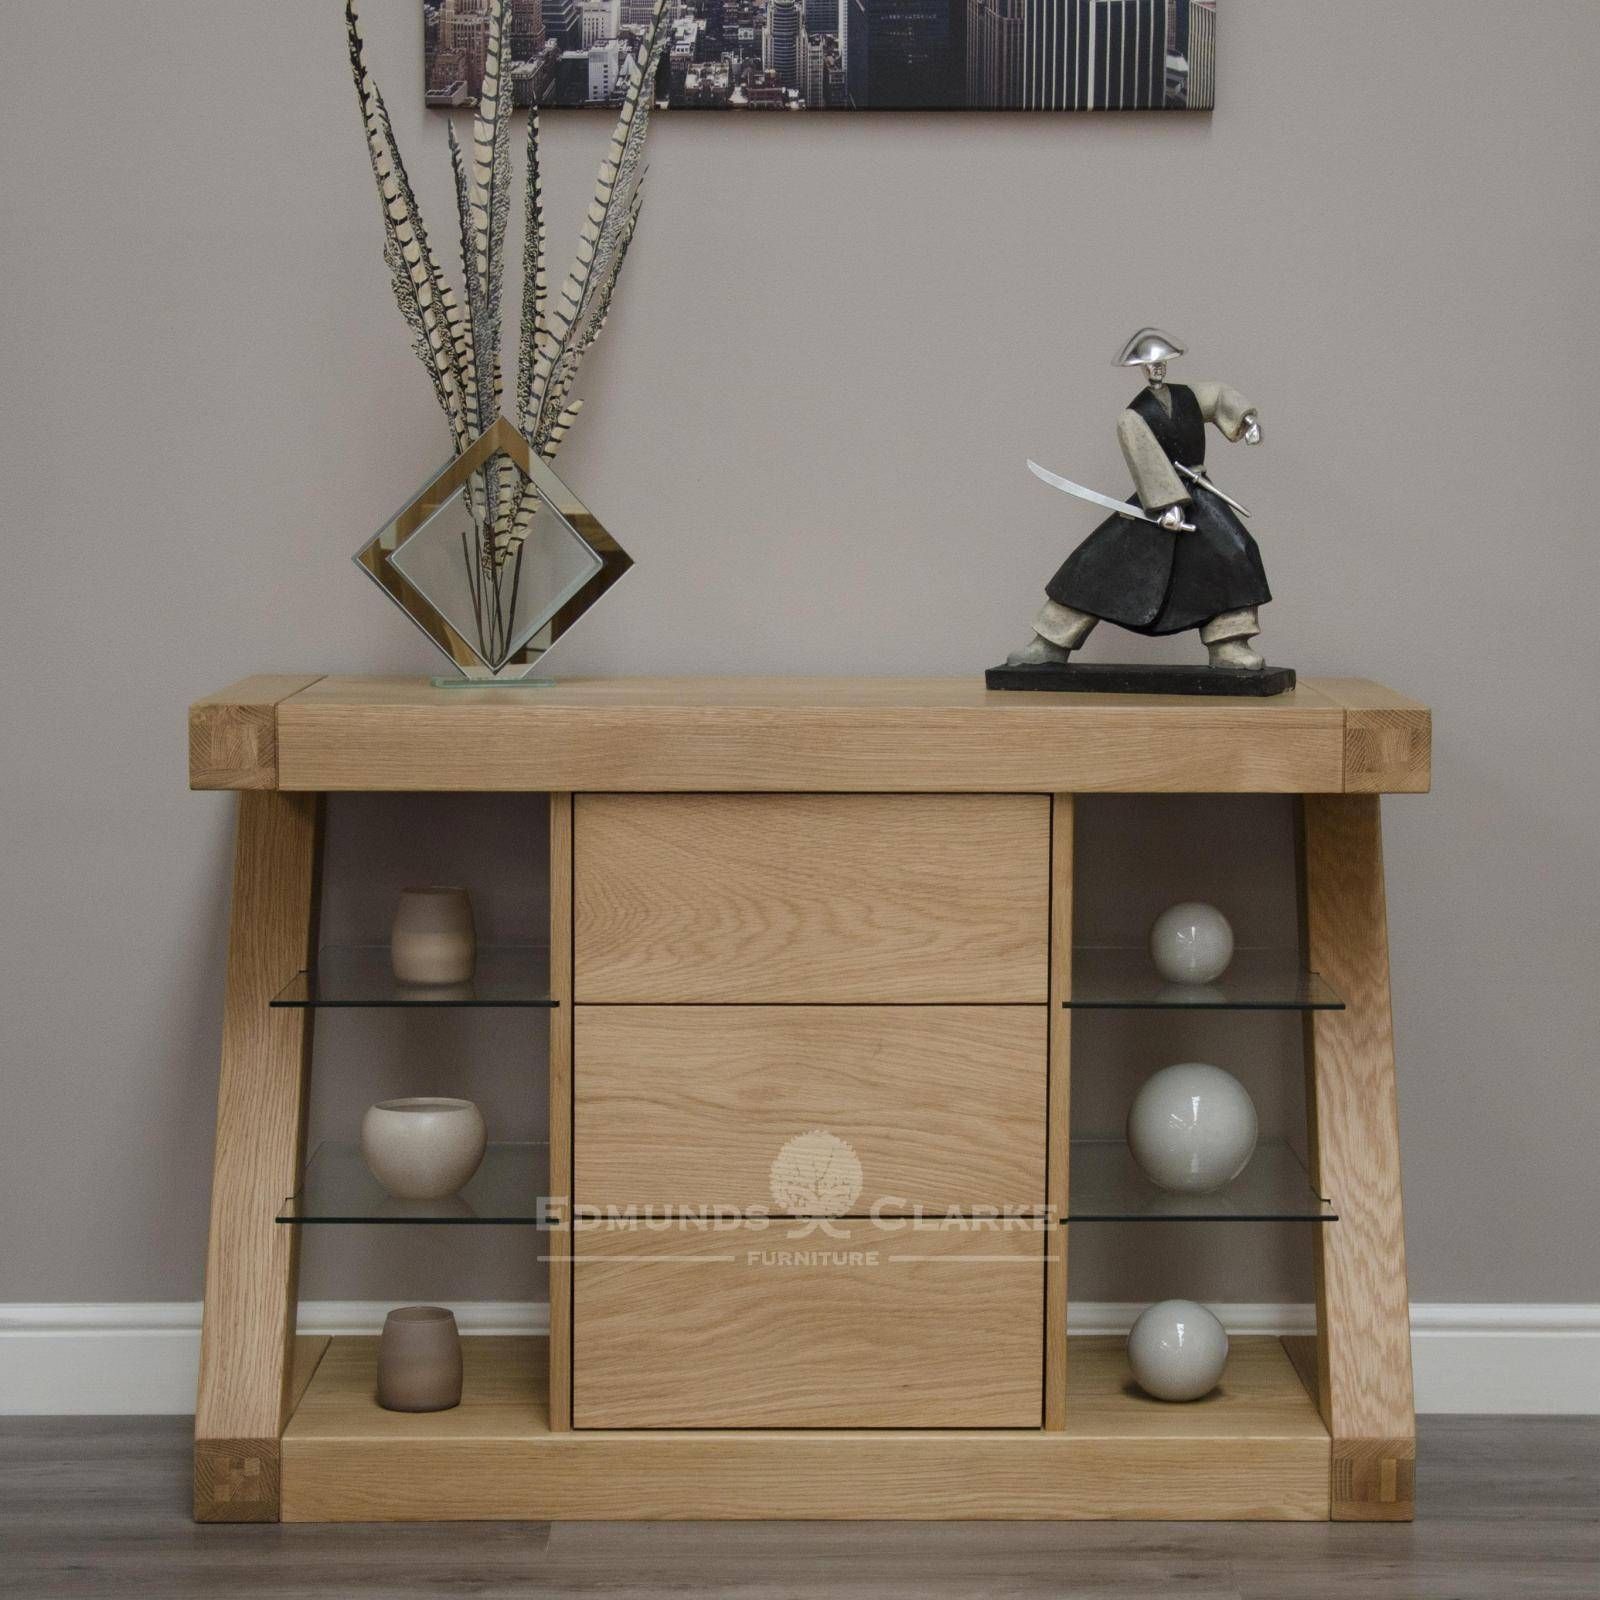 Designer Solid Oak Small Sideboard – Oak Sideboards For The With Regard To Most Up To Date Lounge Sideboards (View 9 of 15)